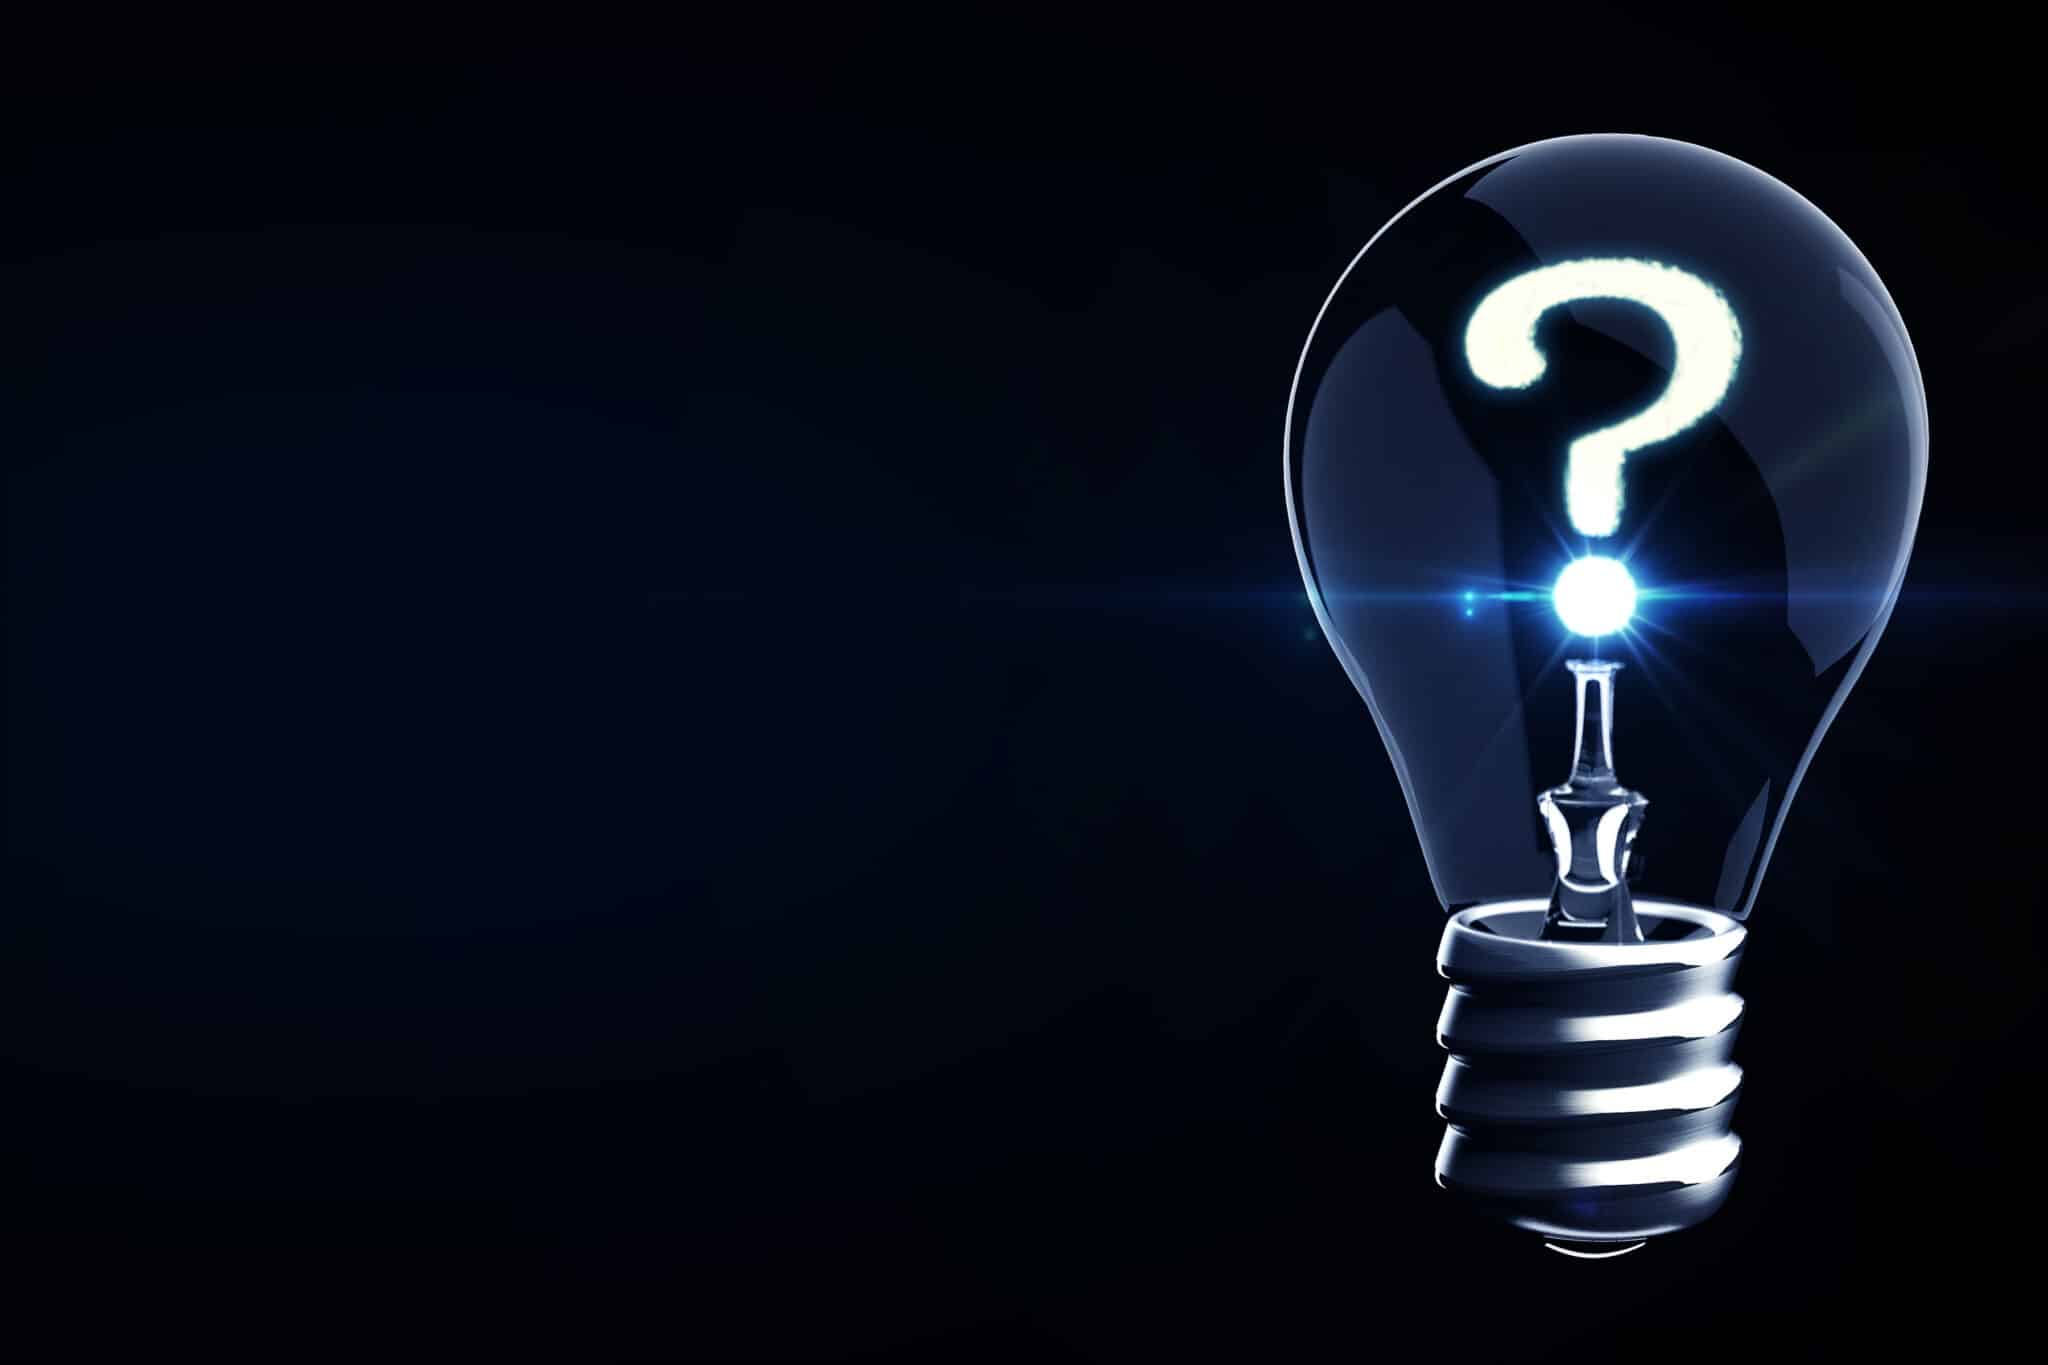 A lightbulb with a question mark inside, representing curiosity or the idea of seeking answers about Surge Protection.